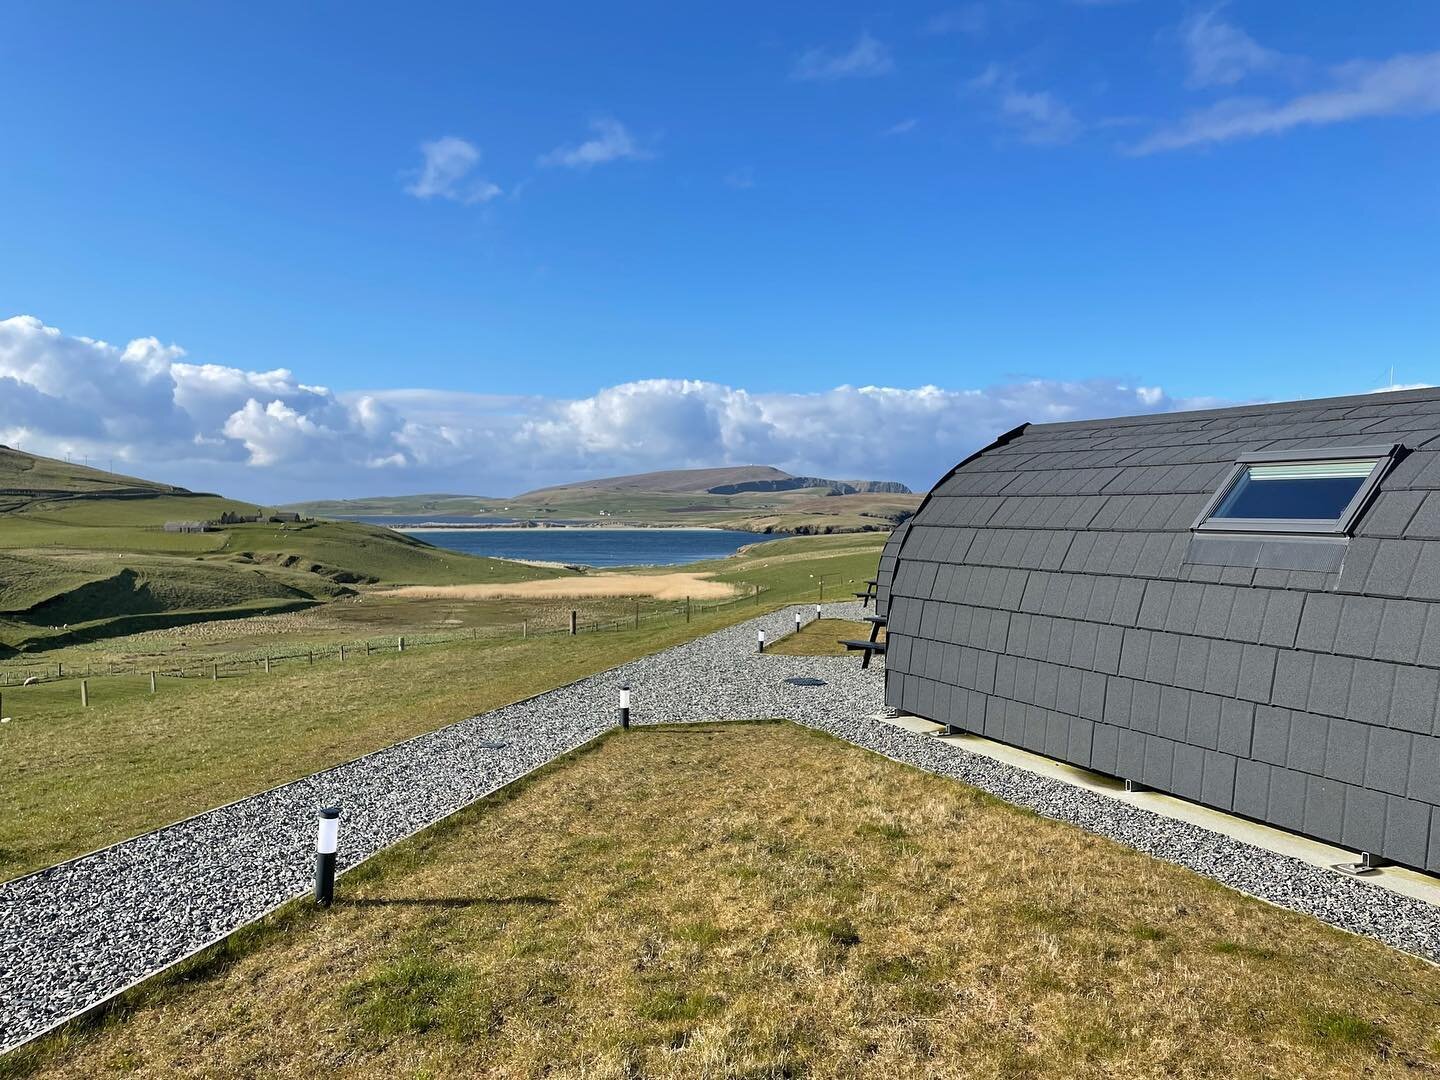 We had an amazing at Shetland Glamping a few weeks ago. The site at Rerwick, a few miles south of Bigton, on the South Mainland&rsquo;s fractured Atlantic coastline, contains two pods and the foundations of a third to be installed later this year or 